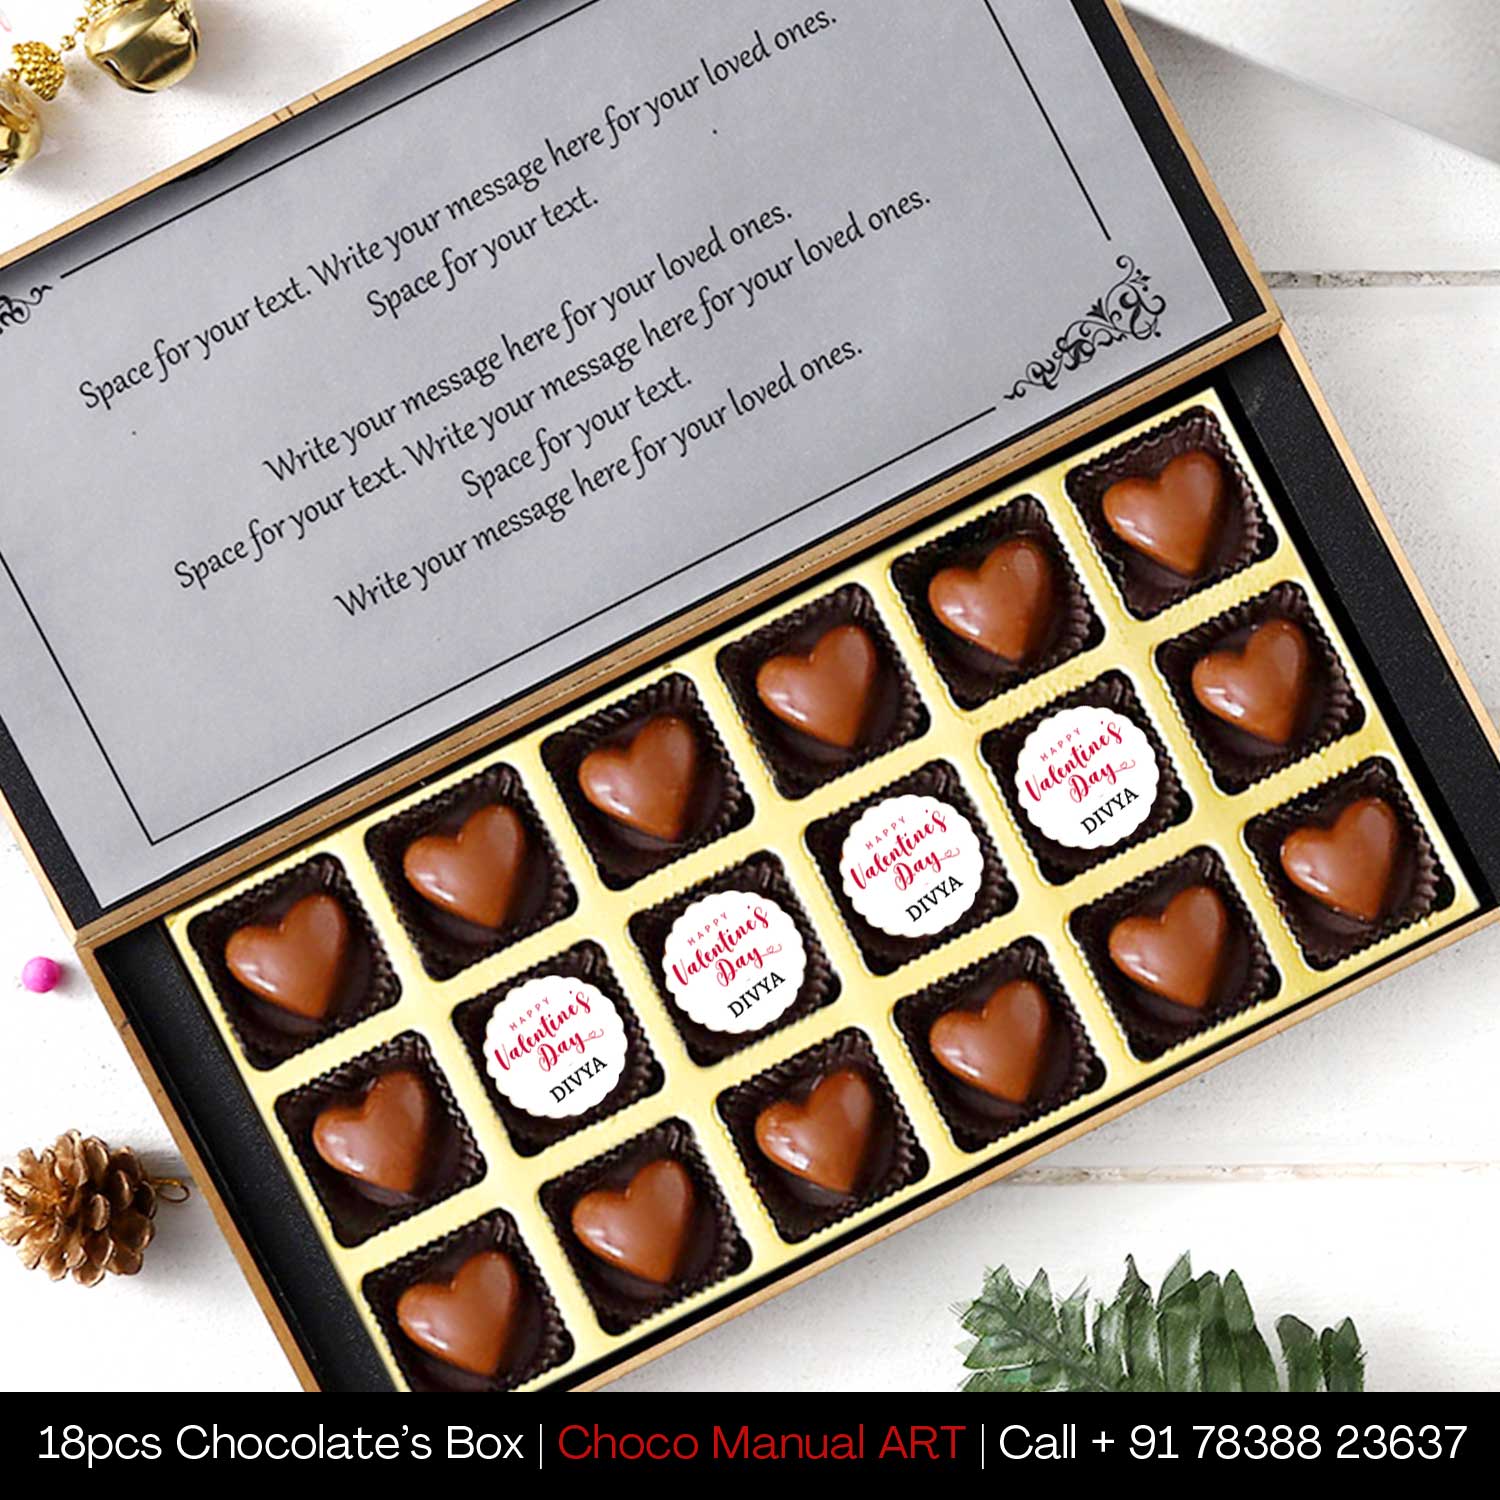 Full Of Hearts & Love Personalised Chocolate Box